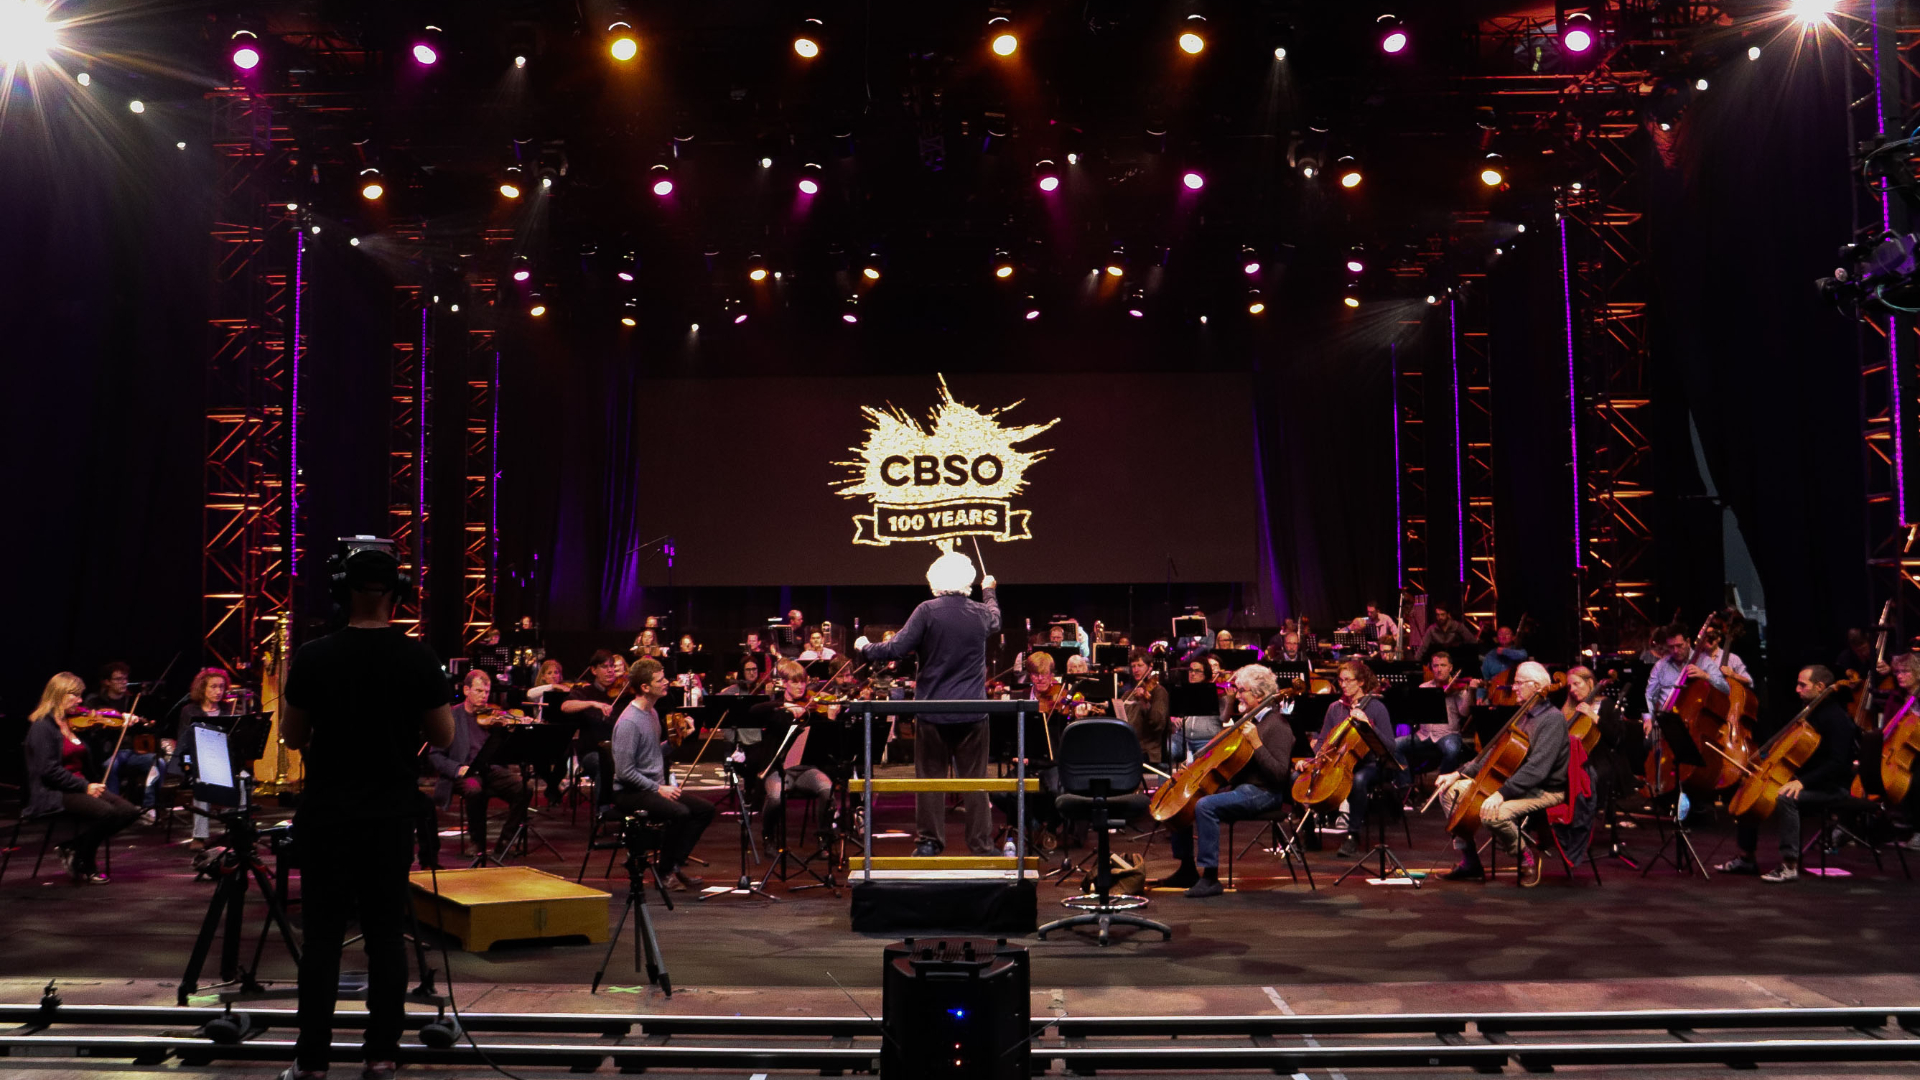 PRG LIVE Space hosted the CBSO 100th Anniversary Livestream